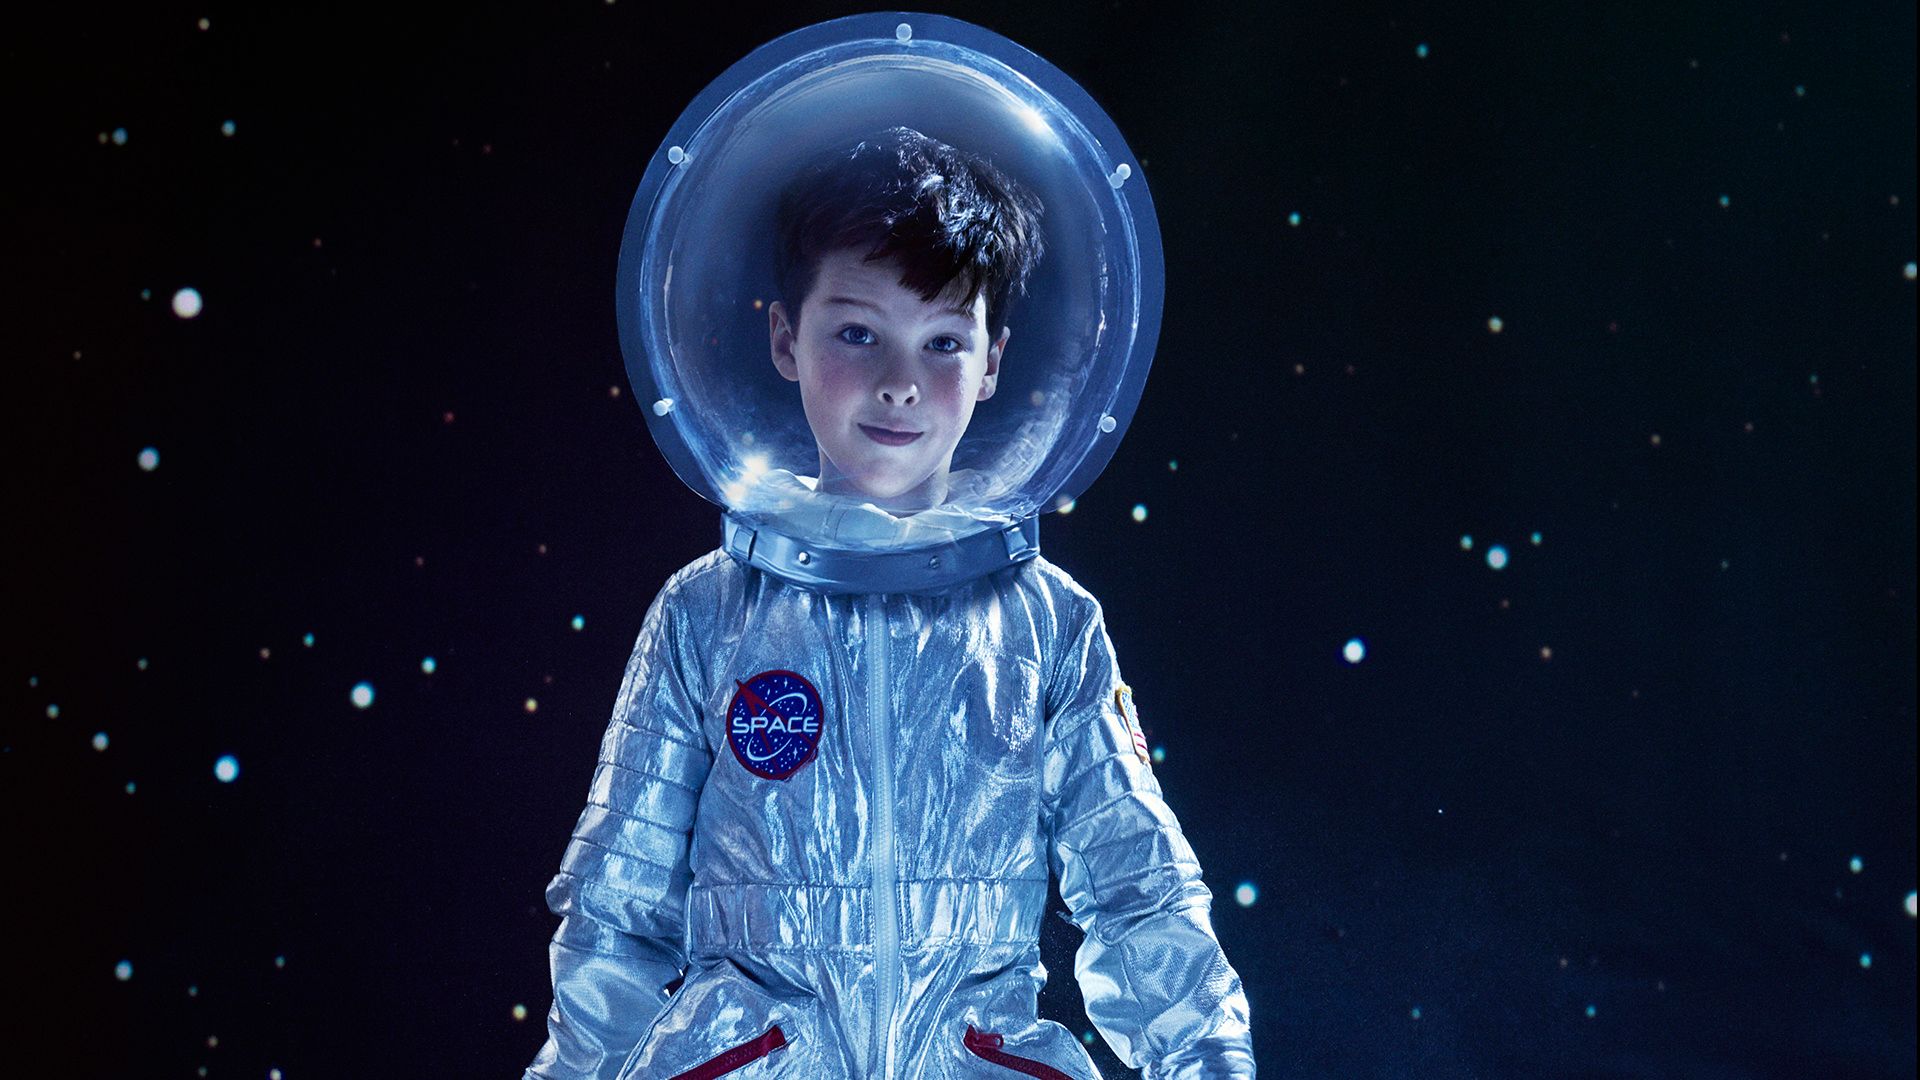 Iain Armitage of Young Sheldon dressed up as American astronaut.